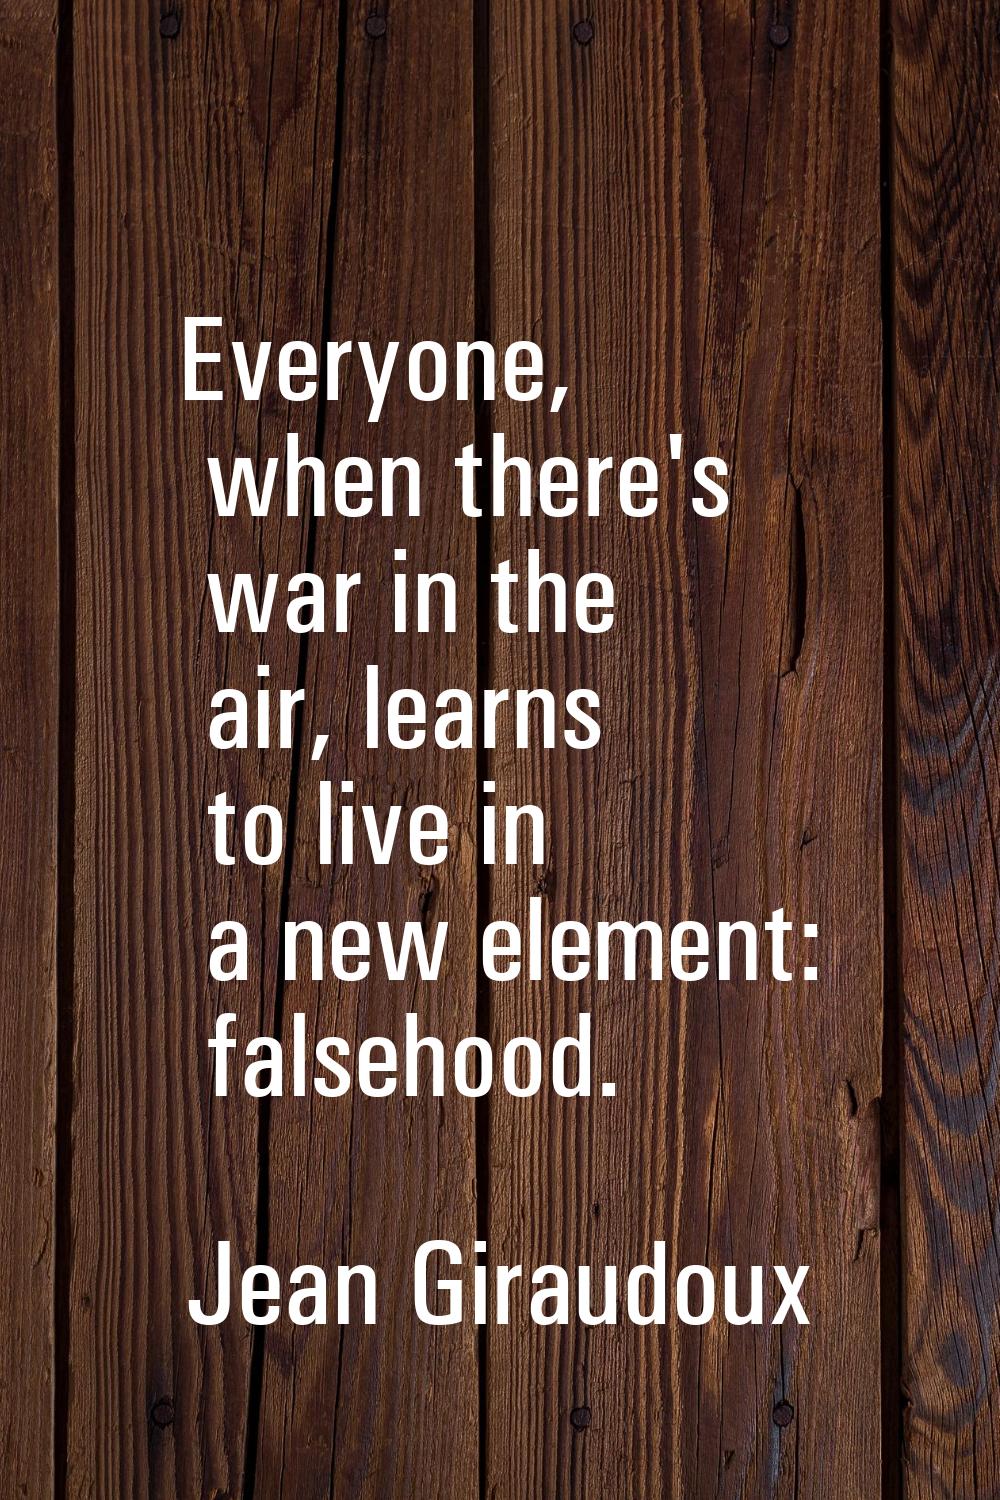 Everyone, when there's war in the air, learns to live in a new element: falsehood.